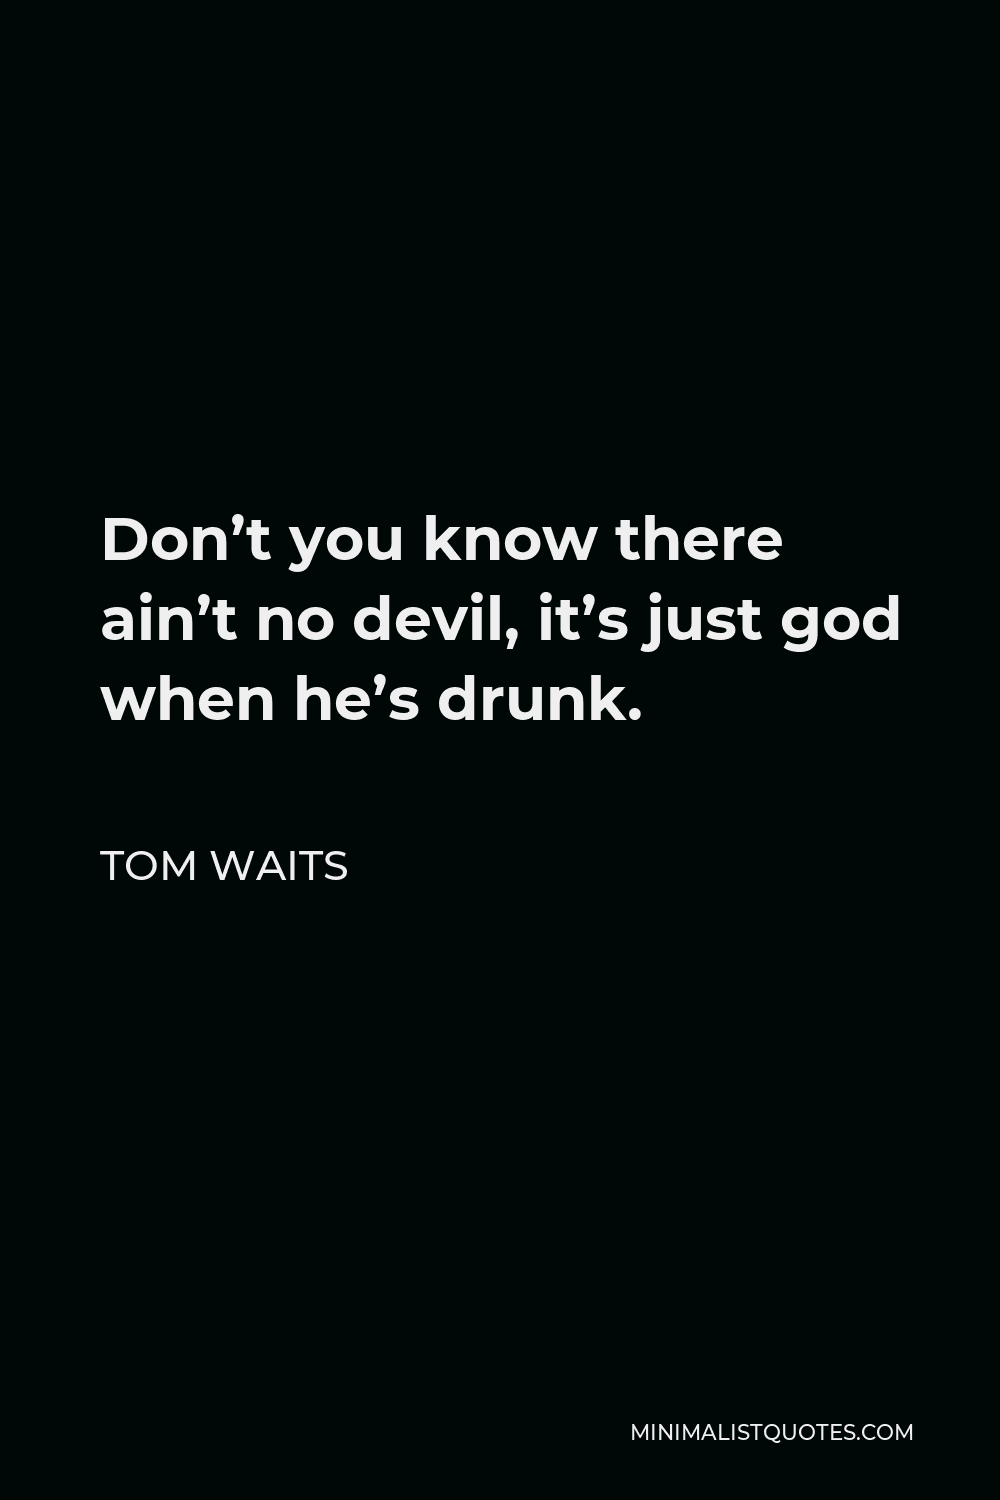 Tom Waits Quote - Don’t you know there ain’t no devil, it’s just god when he’s drunk.